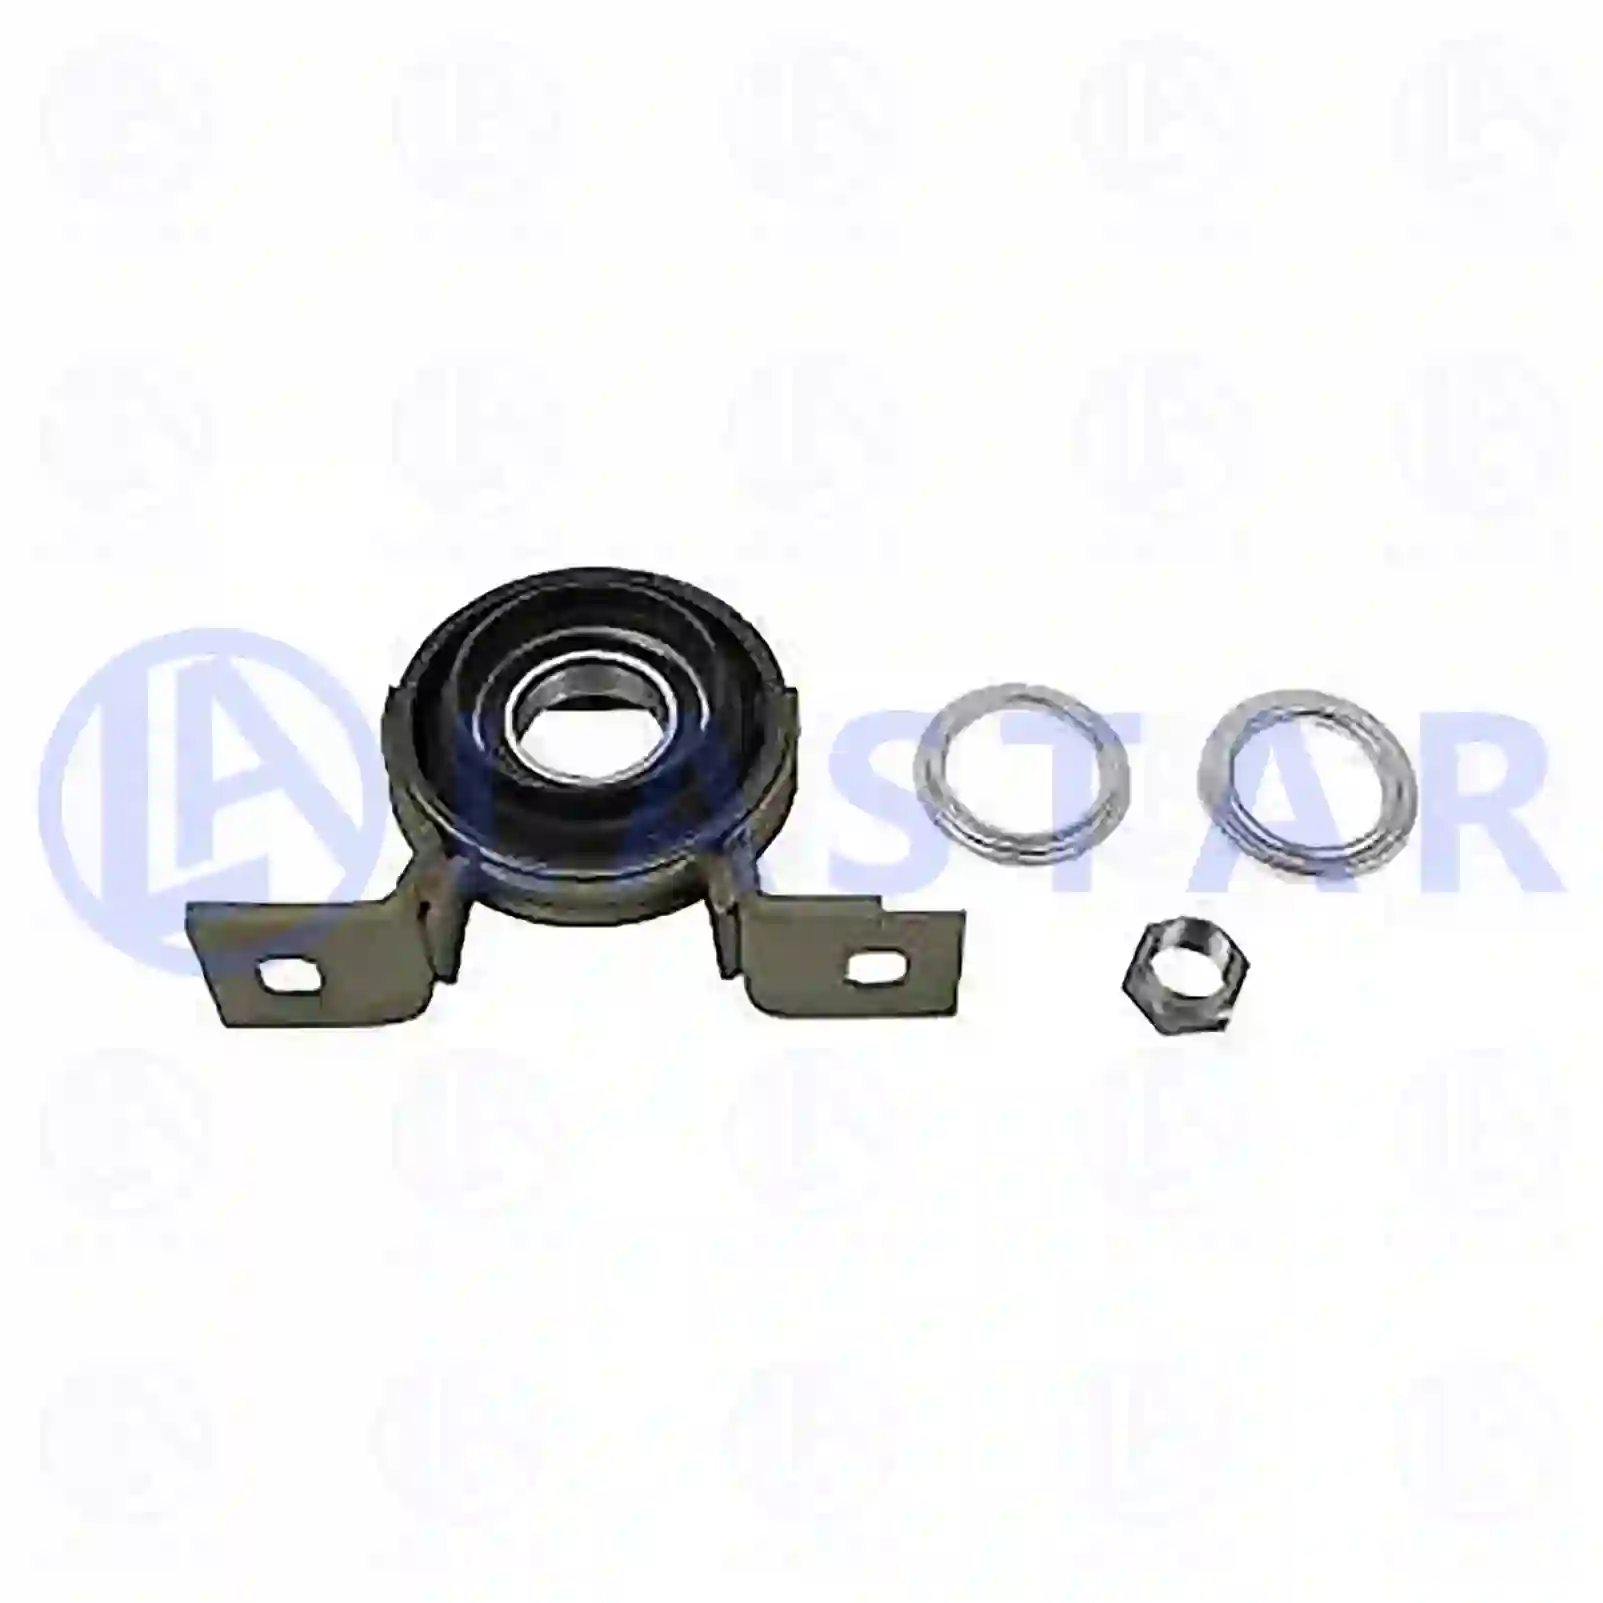 Center bearing, 77734111, 375252191R ||  77734111 Lastar Spare Part | Truck Spare Parts, Auotomotive Spare Parts Center bearing, 77734111, 375252191R ||  77734111 Lastar Spare Part | Truck Spare Parts, Auotomotive Spare Parts